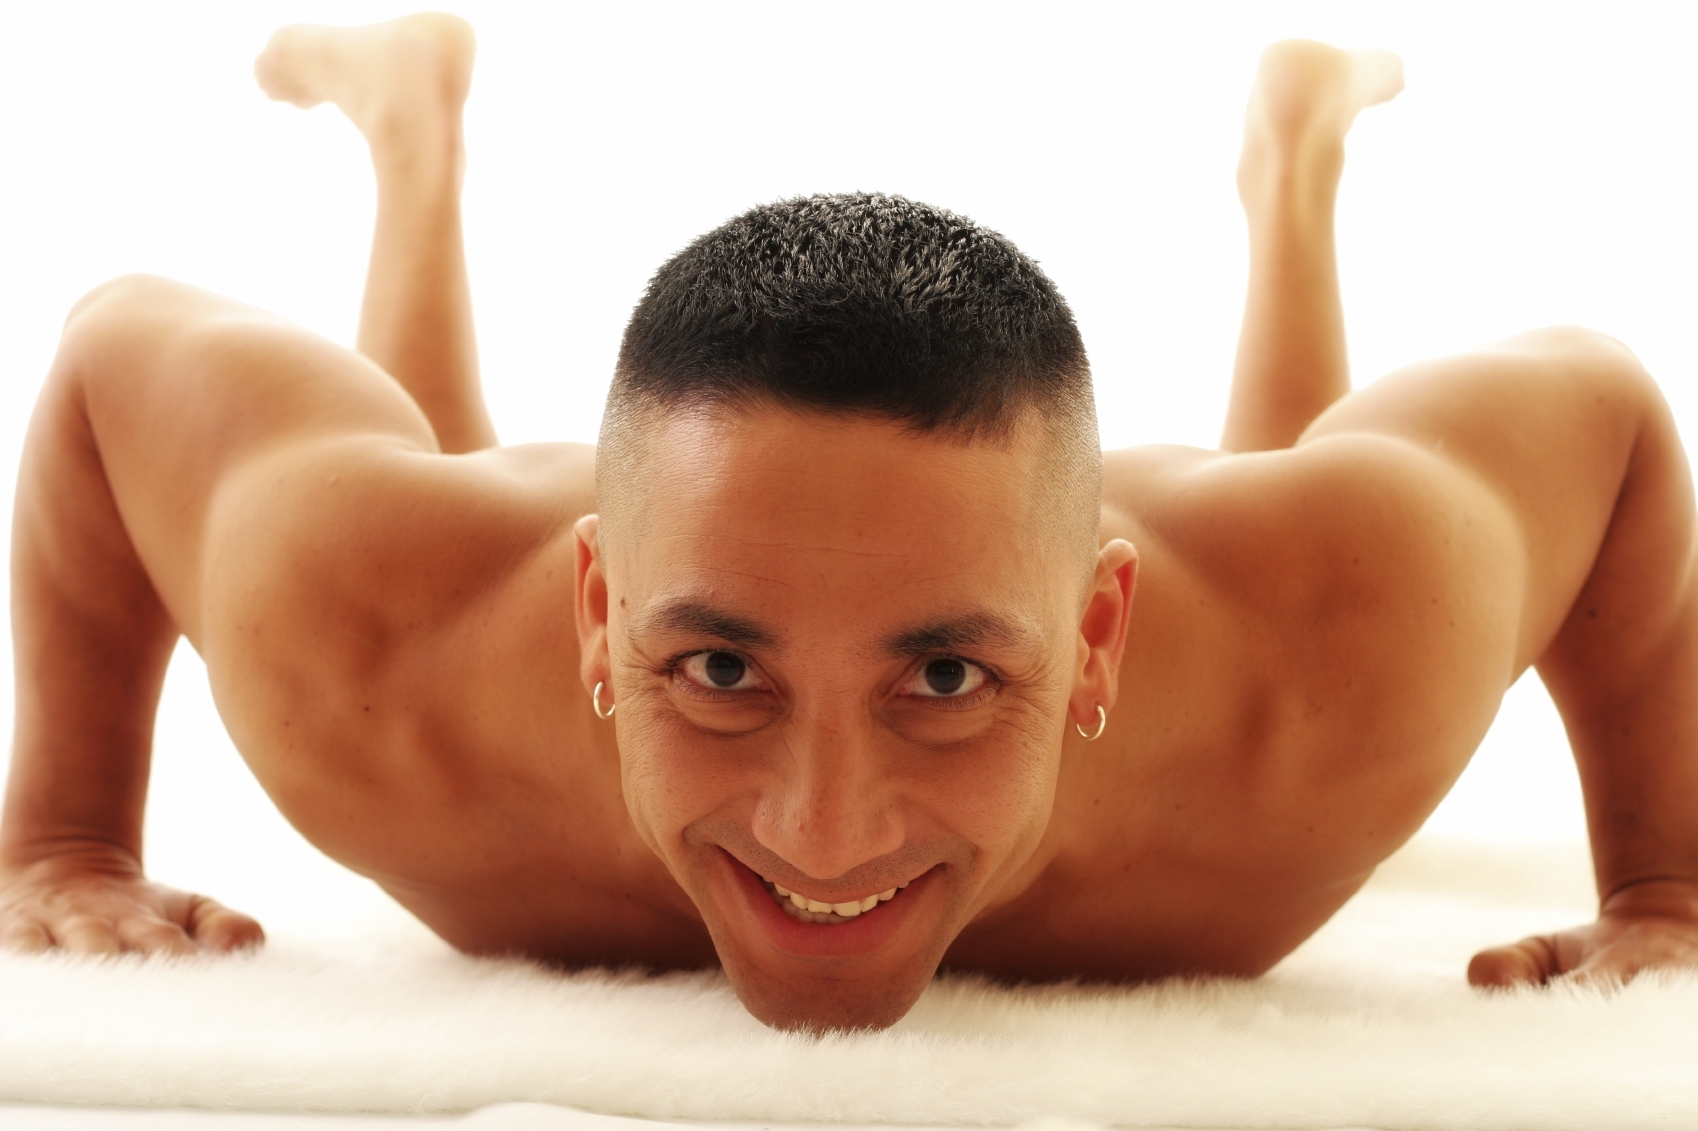 New Craze in the Yoga World: Naked Yoga for Men - Would You Dare?